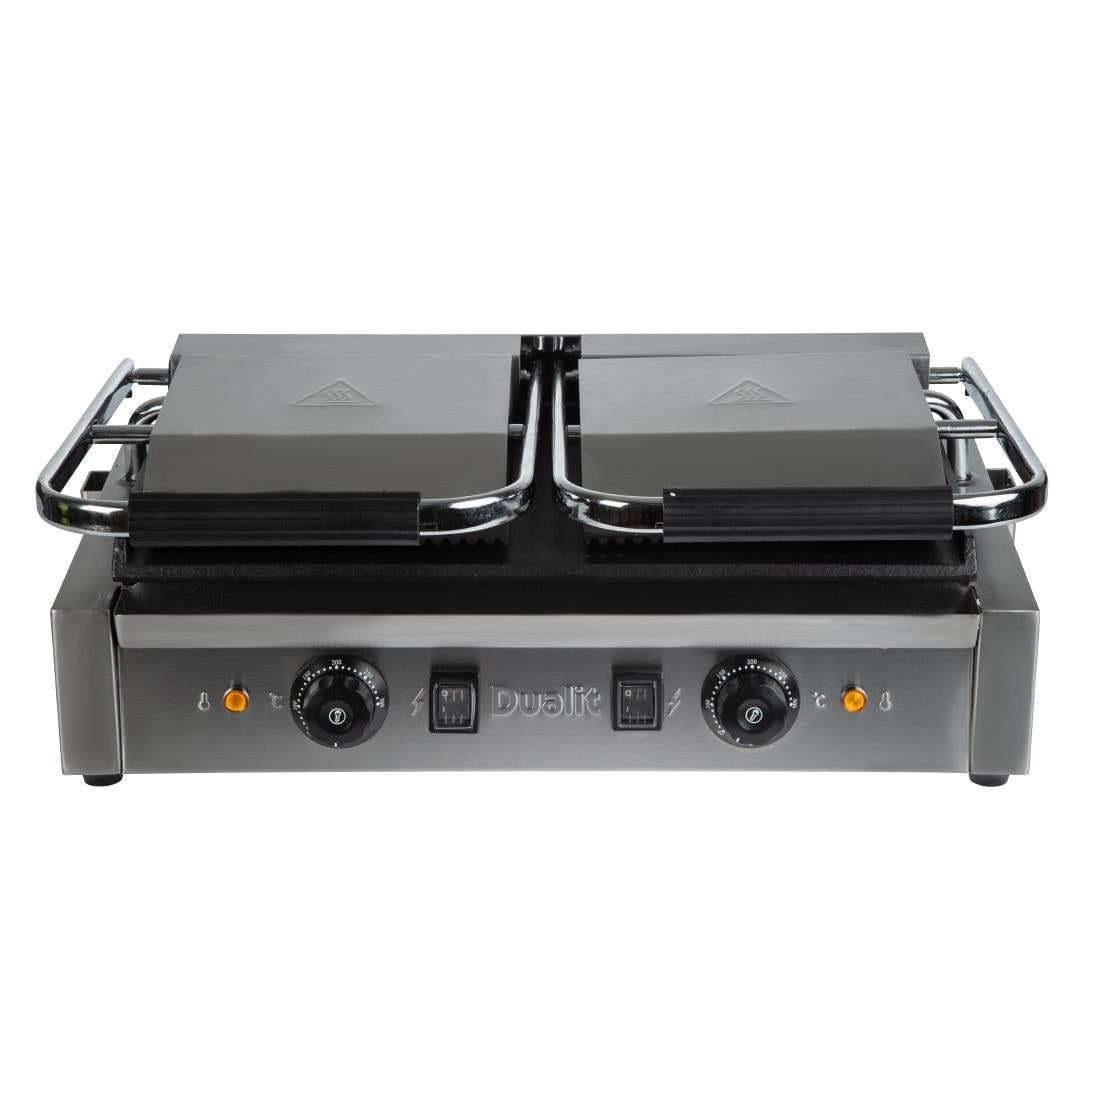 Dualit Double Panini Contact Grill 96002 JD Catering Equipment Solutions Ltd